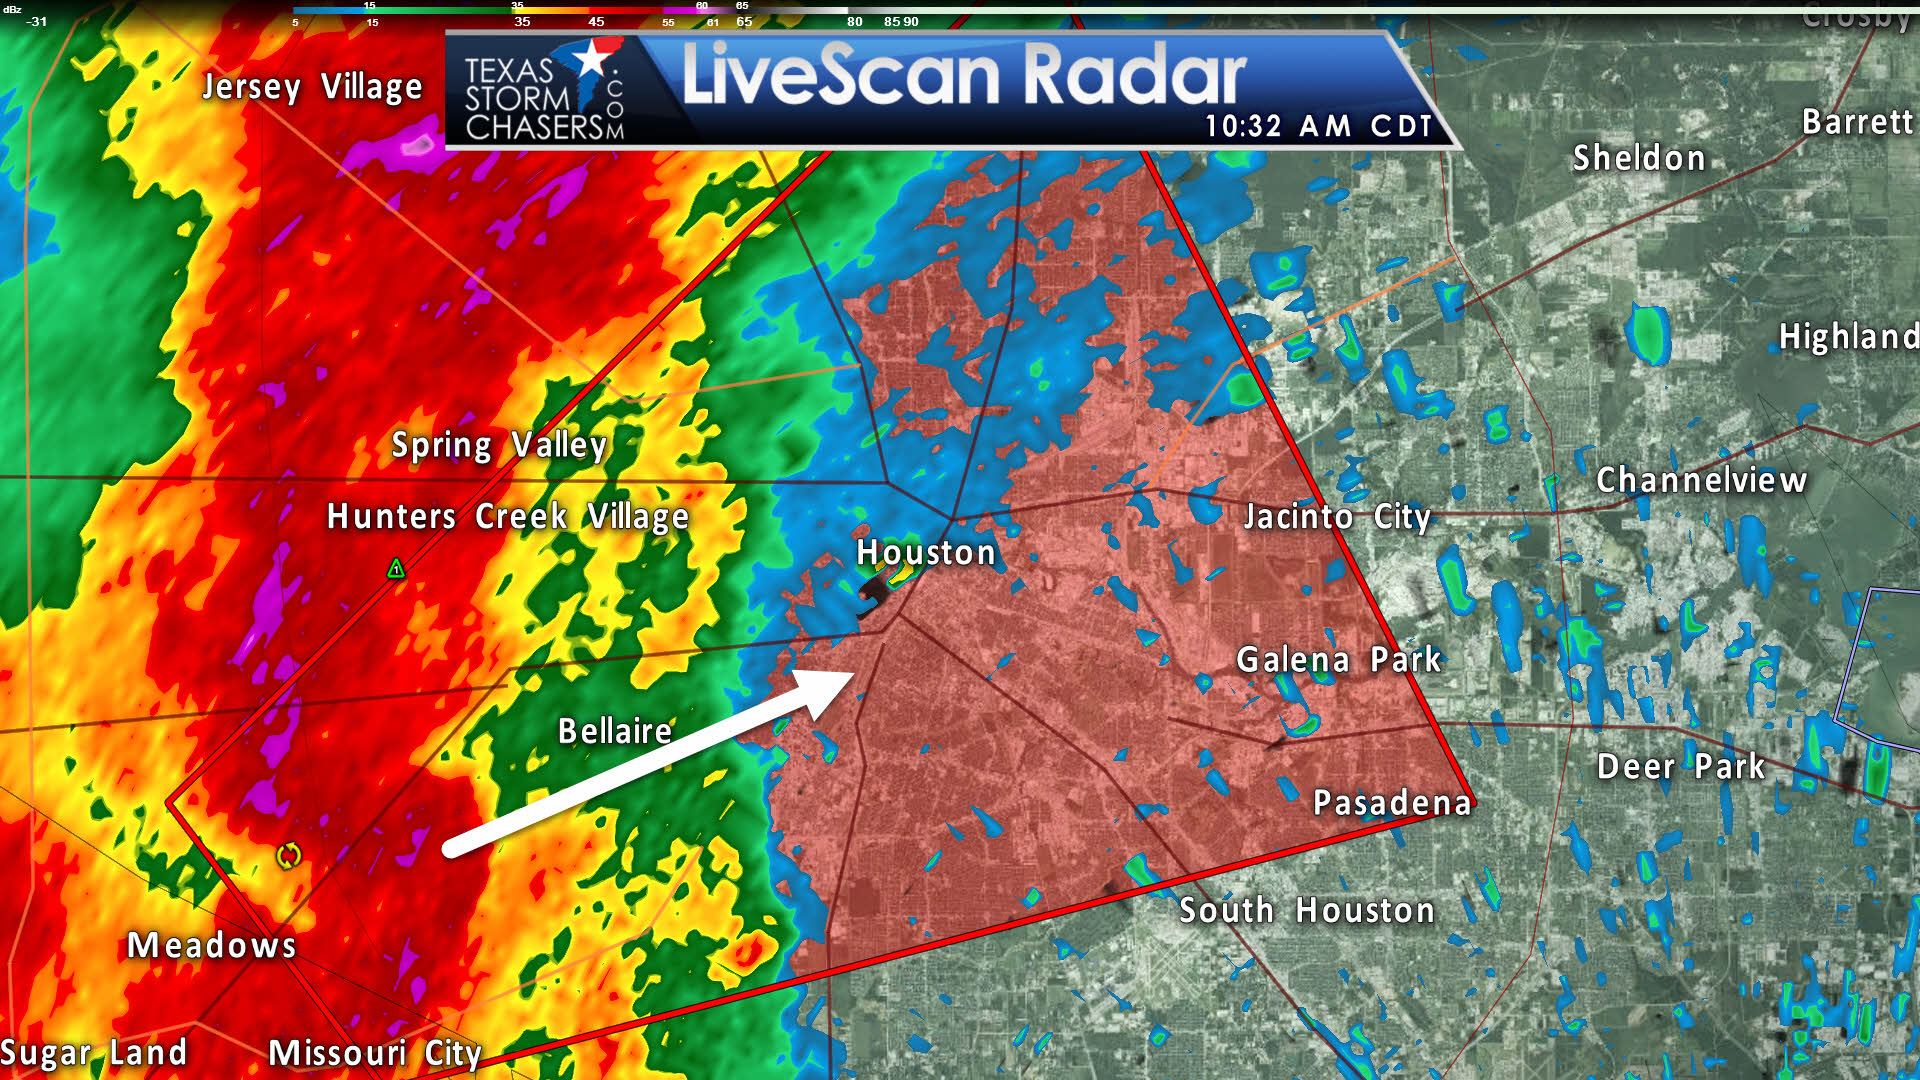 Tornado Warning for Houston (Harris County) till 11AM • Texas Storm Chasers1920 x 1080